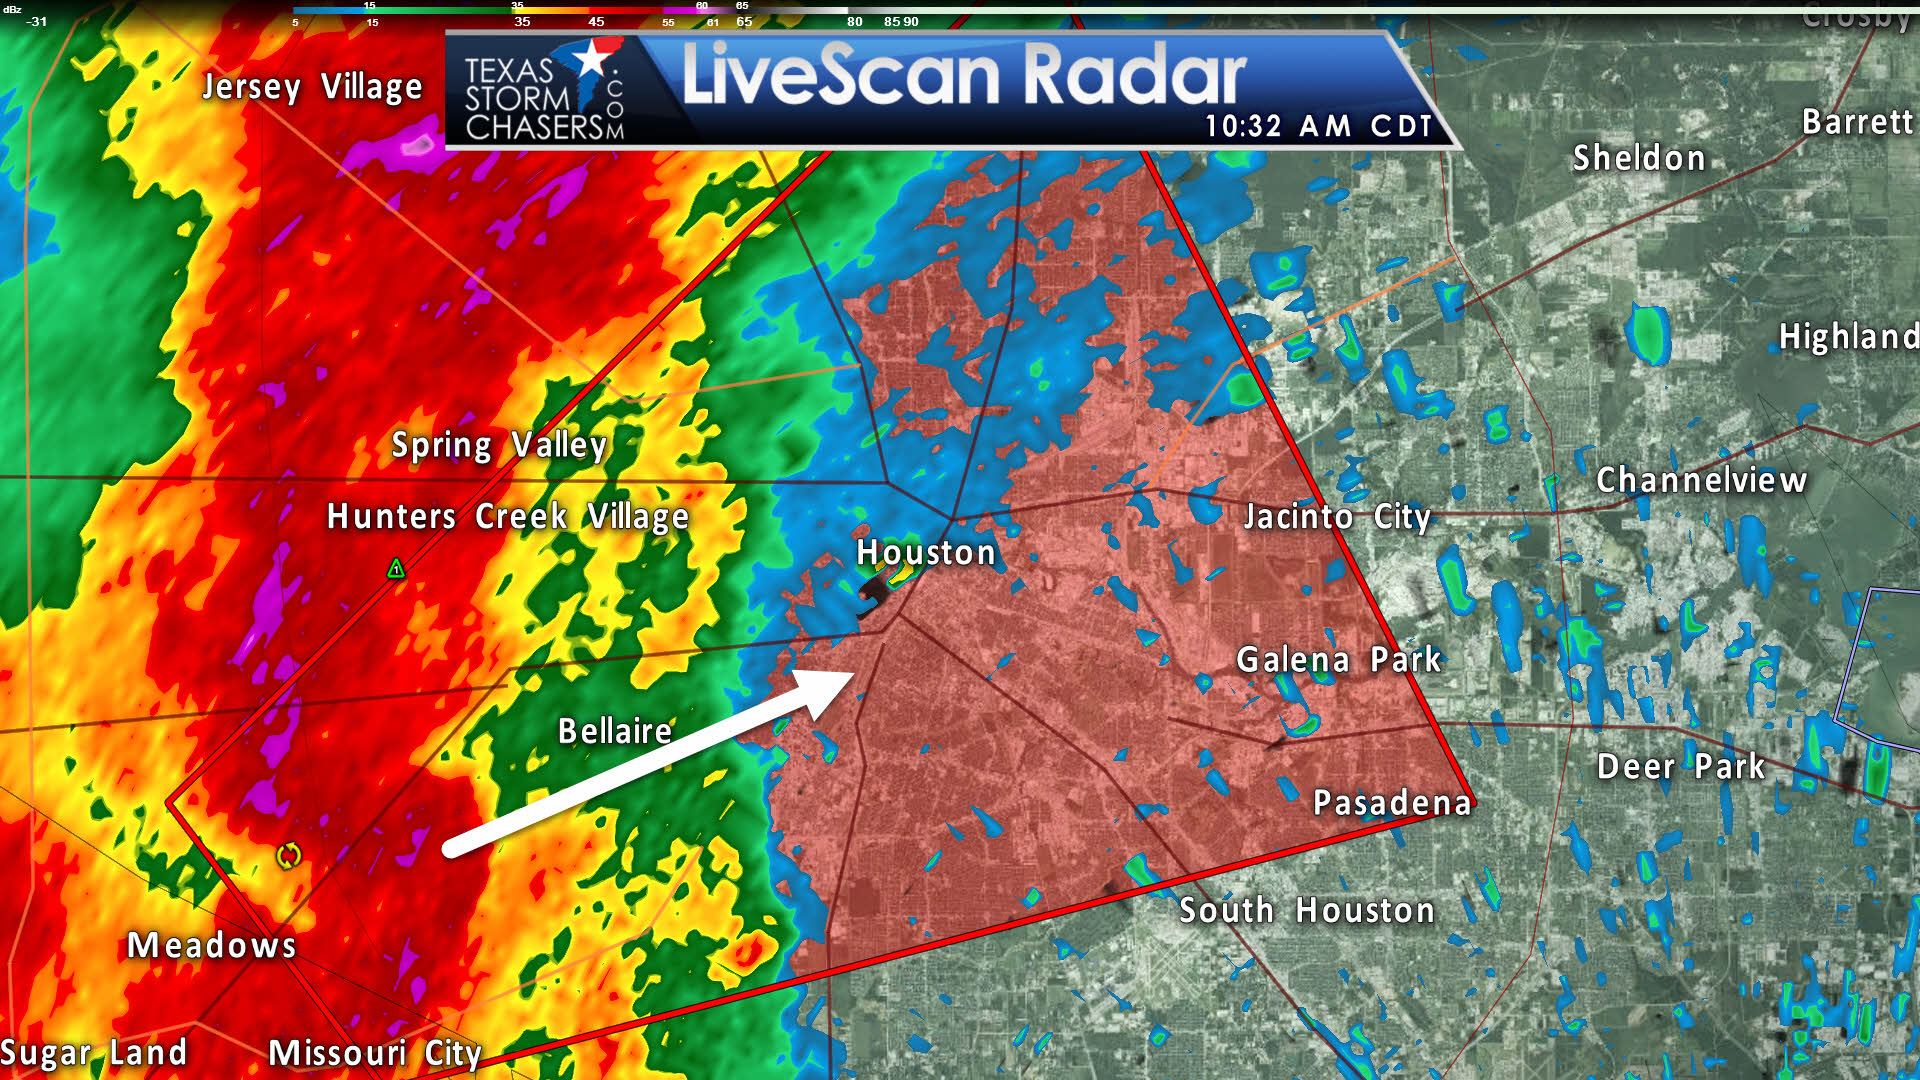 Tornado Warning for Houston (Harris County) till 11AM • Texas Storm Chasers1920 x 1080